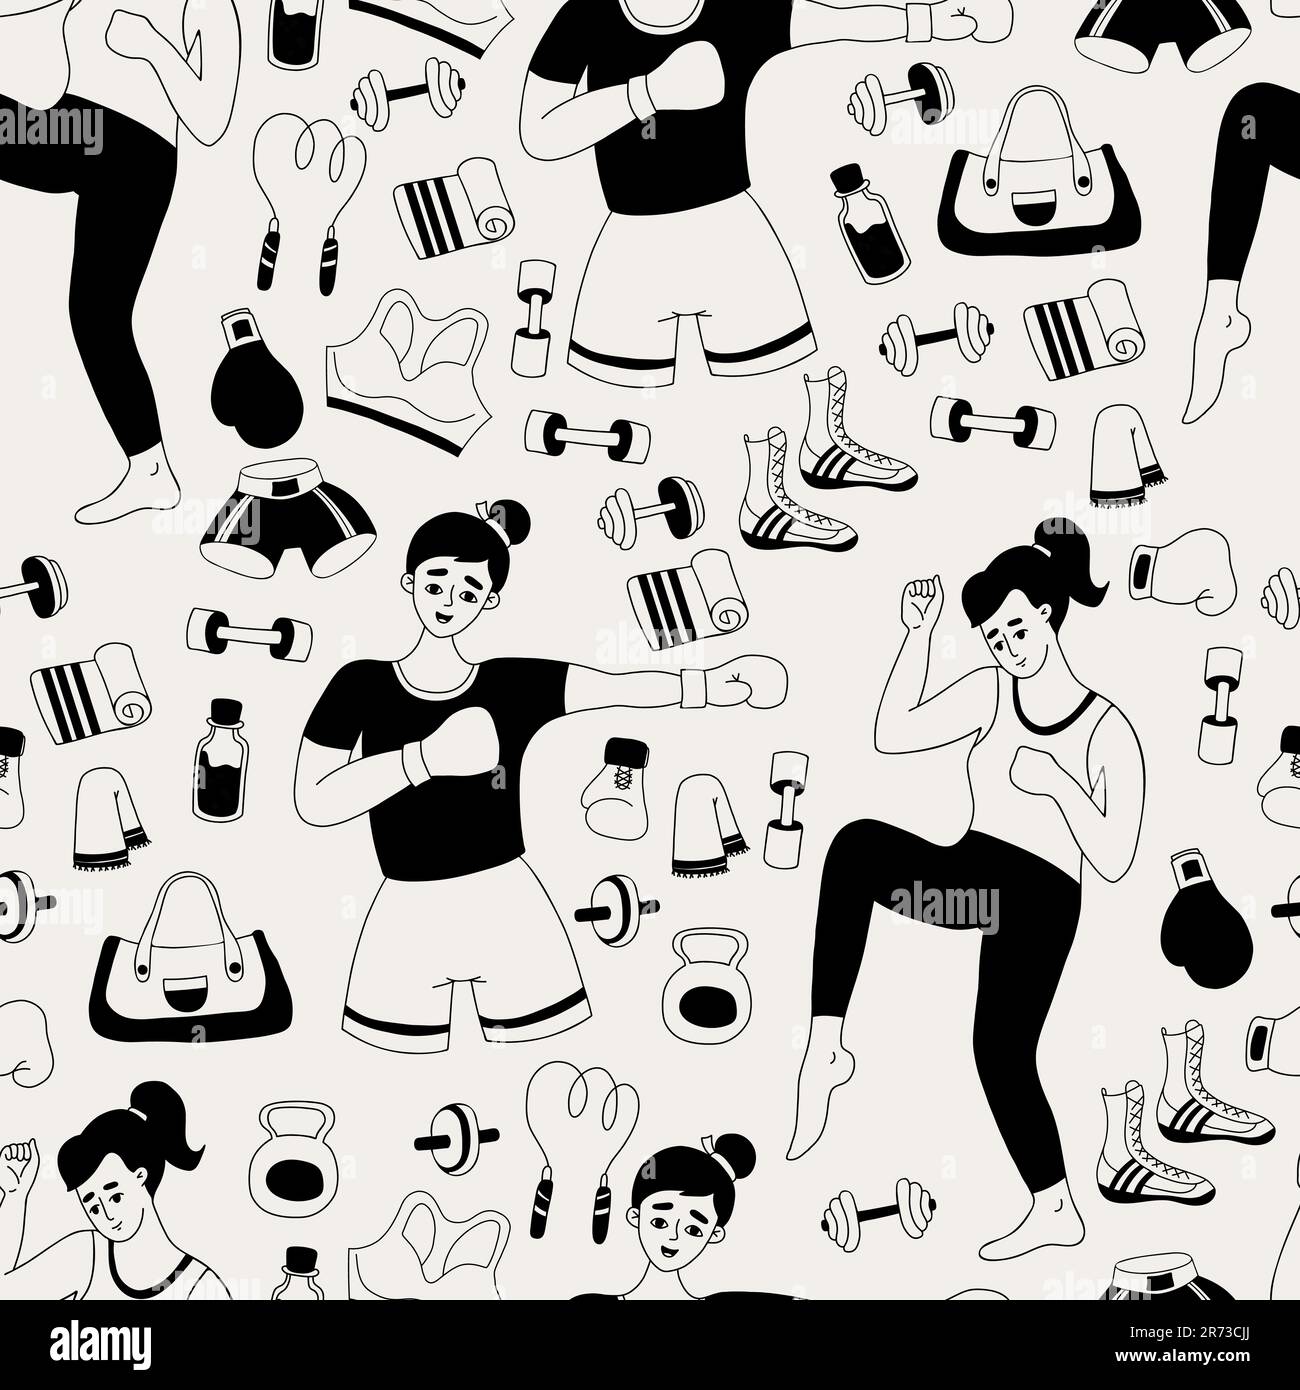 Seamless pattern with fitness stuff for girls Vector Image